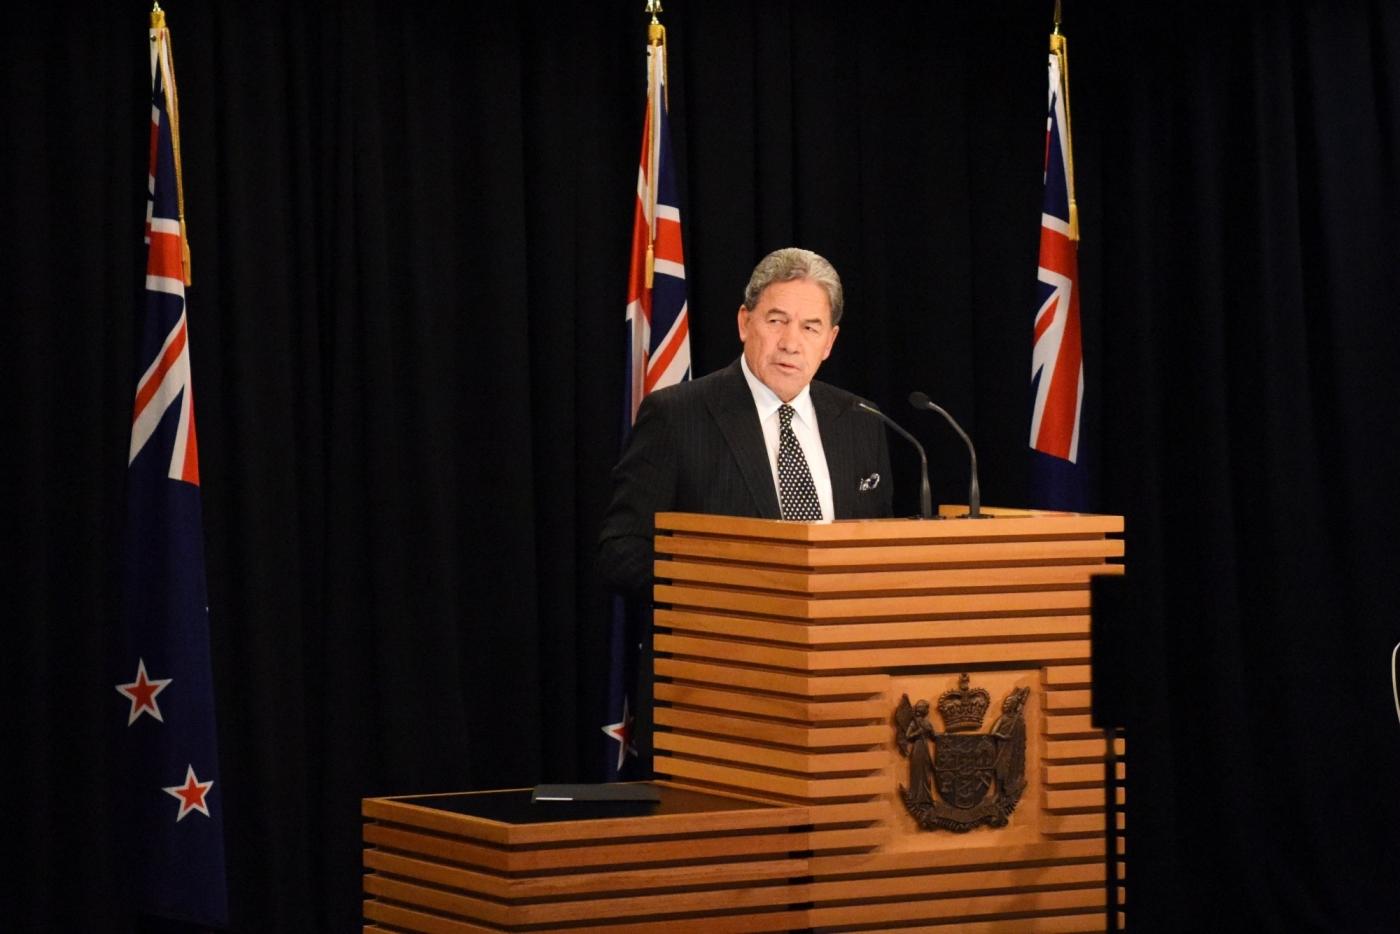 WELLINGTON, Oct. 19, 2017 (Xinhua) -- Winston Peters, leader of New Zealand First party, addresses media in Wellington, New Zealand, on Oct. 19, 2017. The New Zealand First party has decided to side with the Labor party to form the coalition government, NZ First party leader Winston Peters announced here Thursday. (Xinhua/Su Liang/IANS) by .